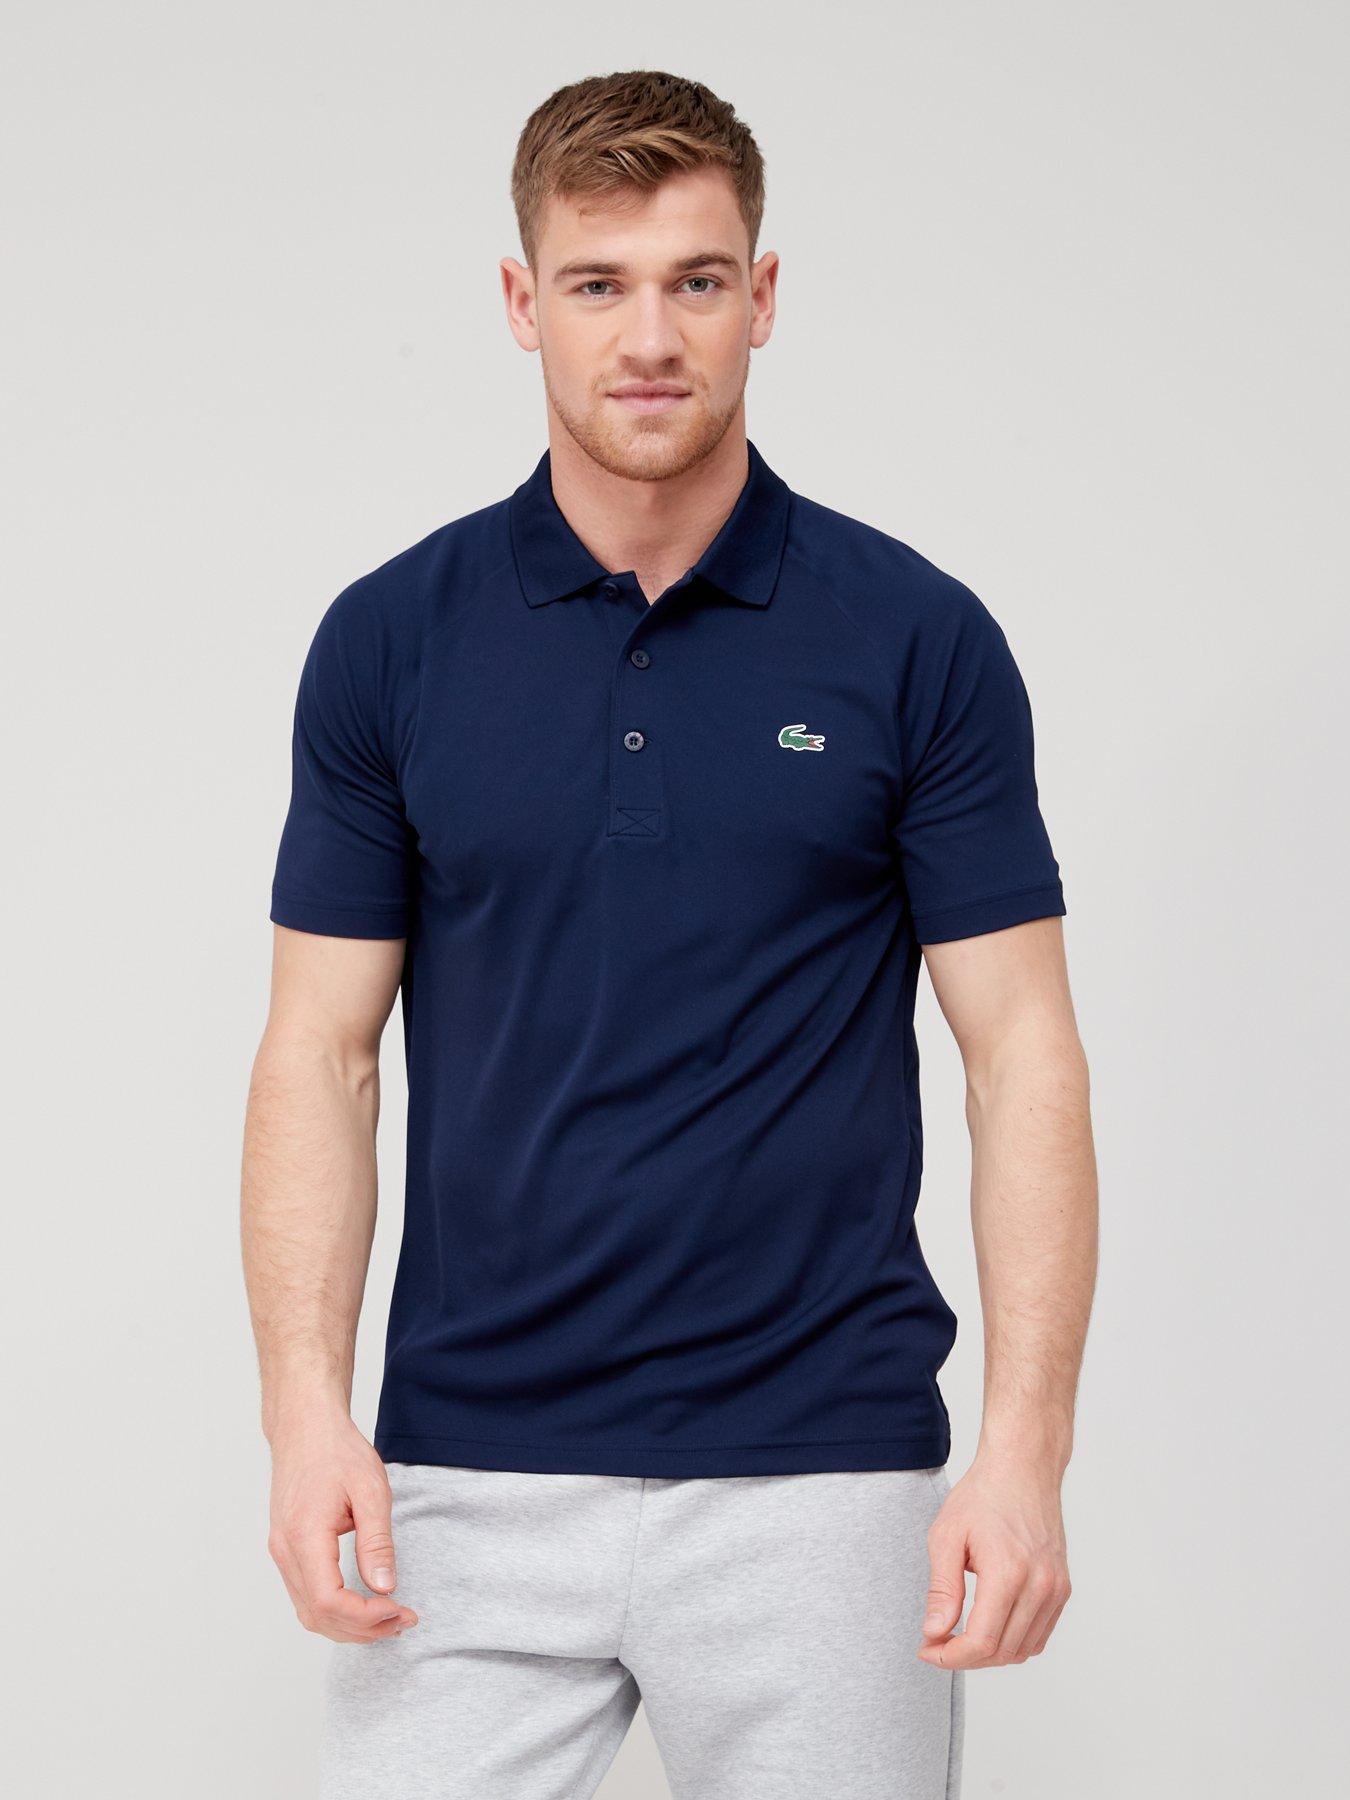 Lacoste Golf Core Performance Shirt - | very.co.uk